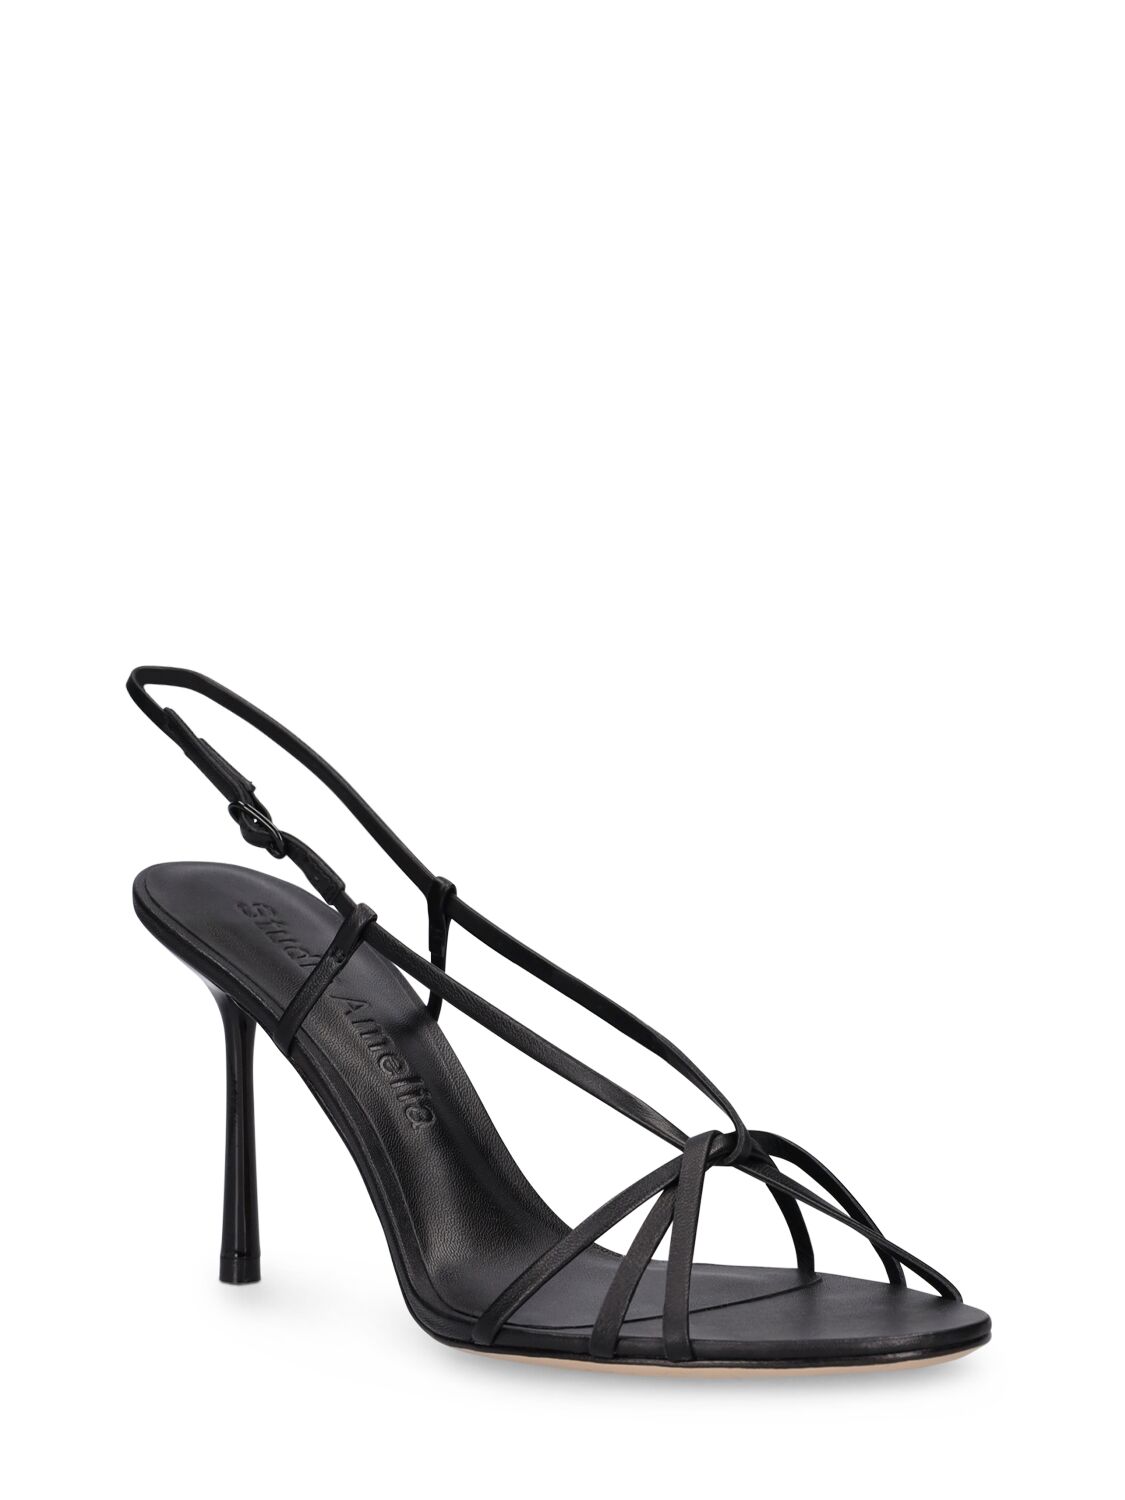 Shop Studio Amelia 90mm Entwined Leather Sandals In Black